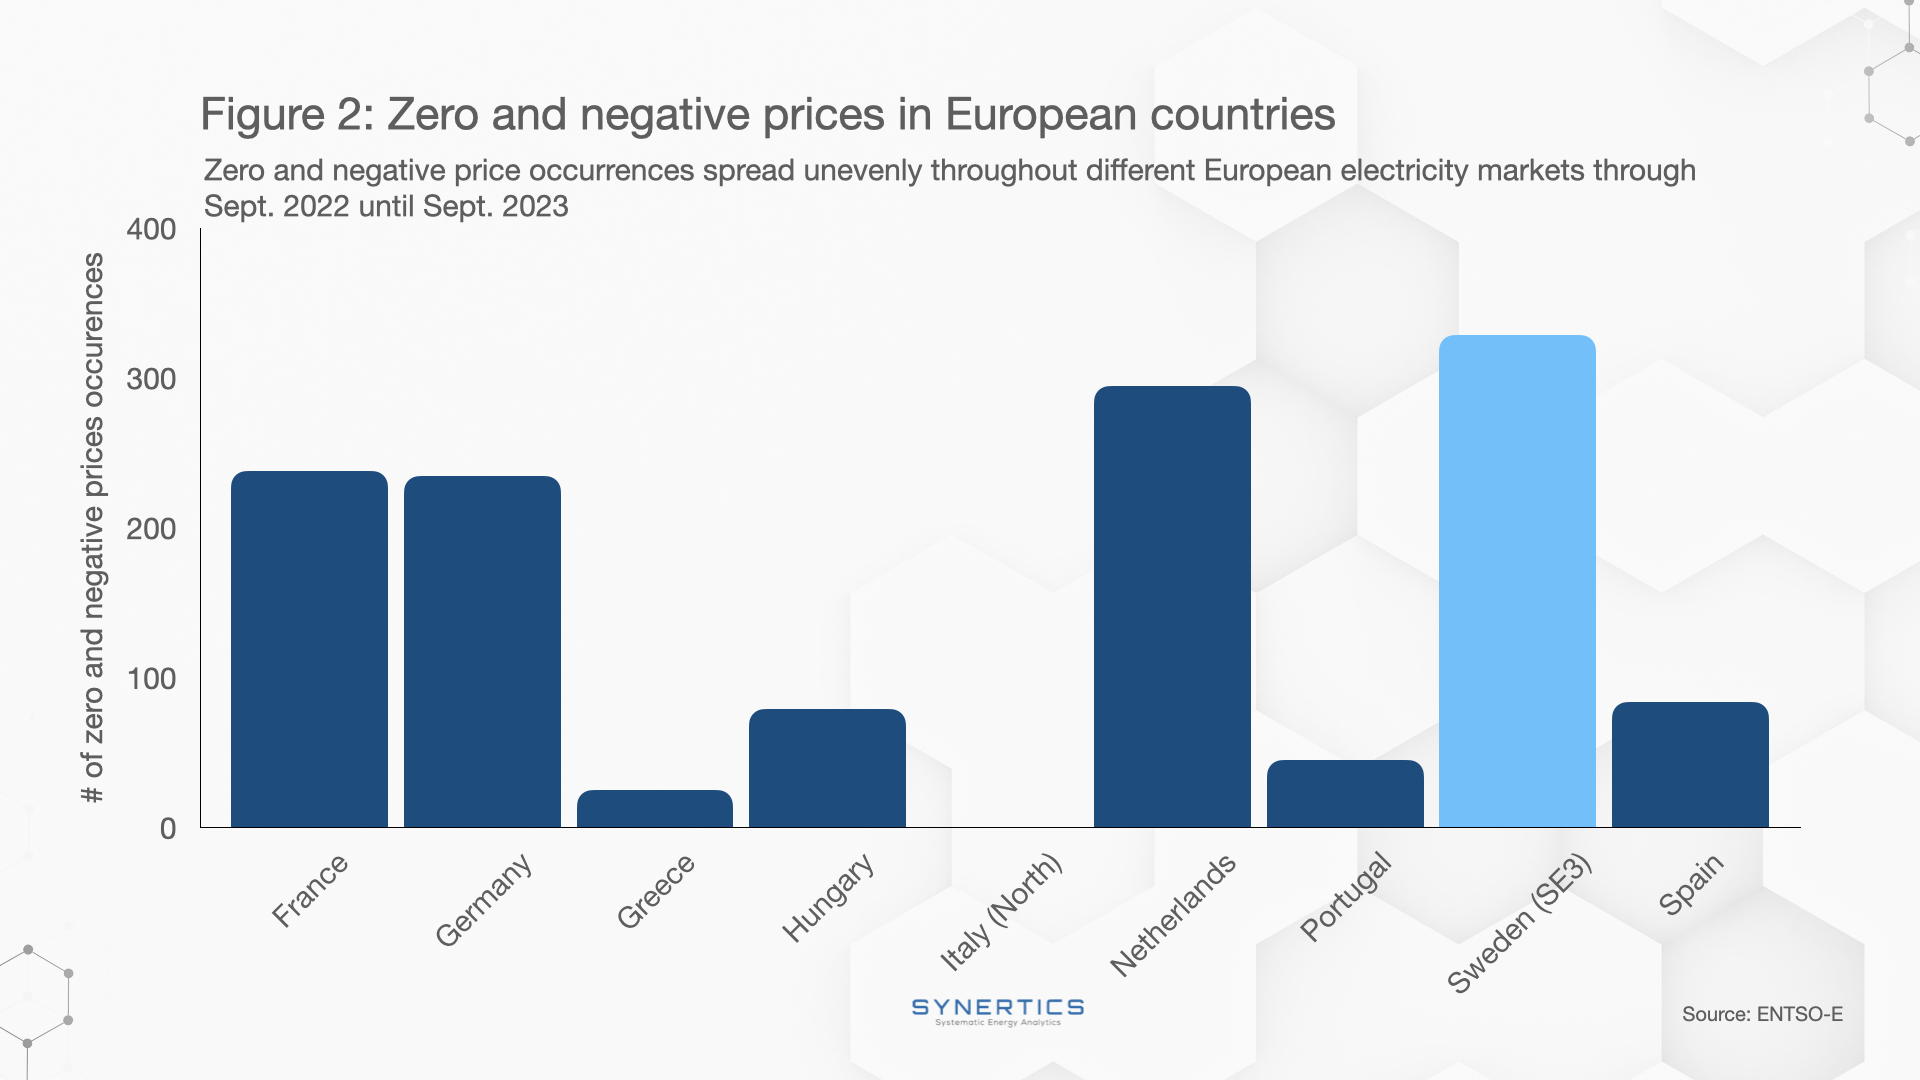 Zero and negative prices in European countries